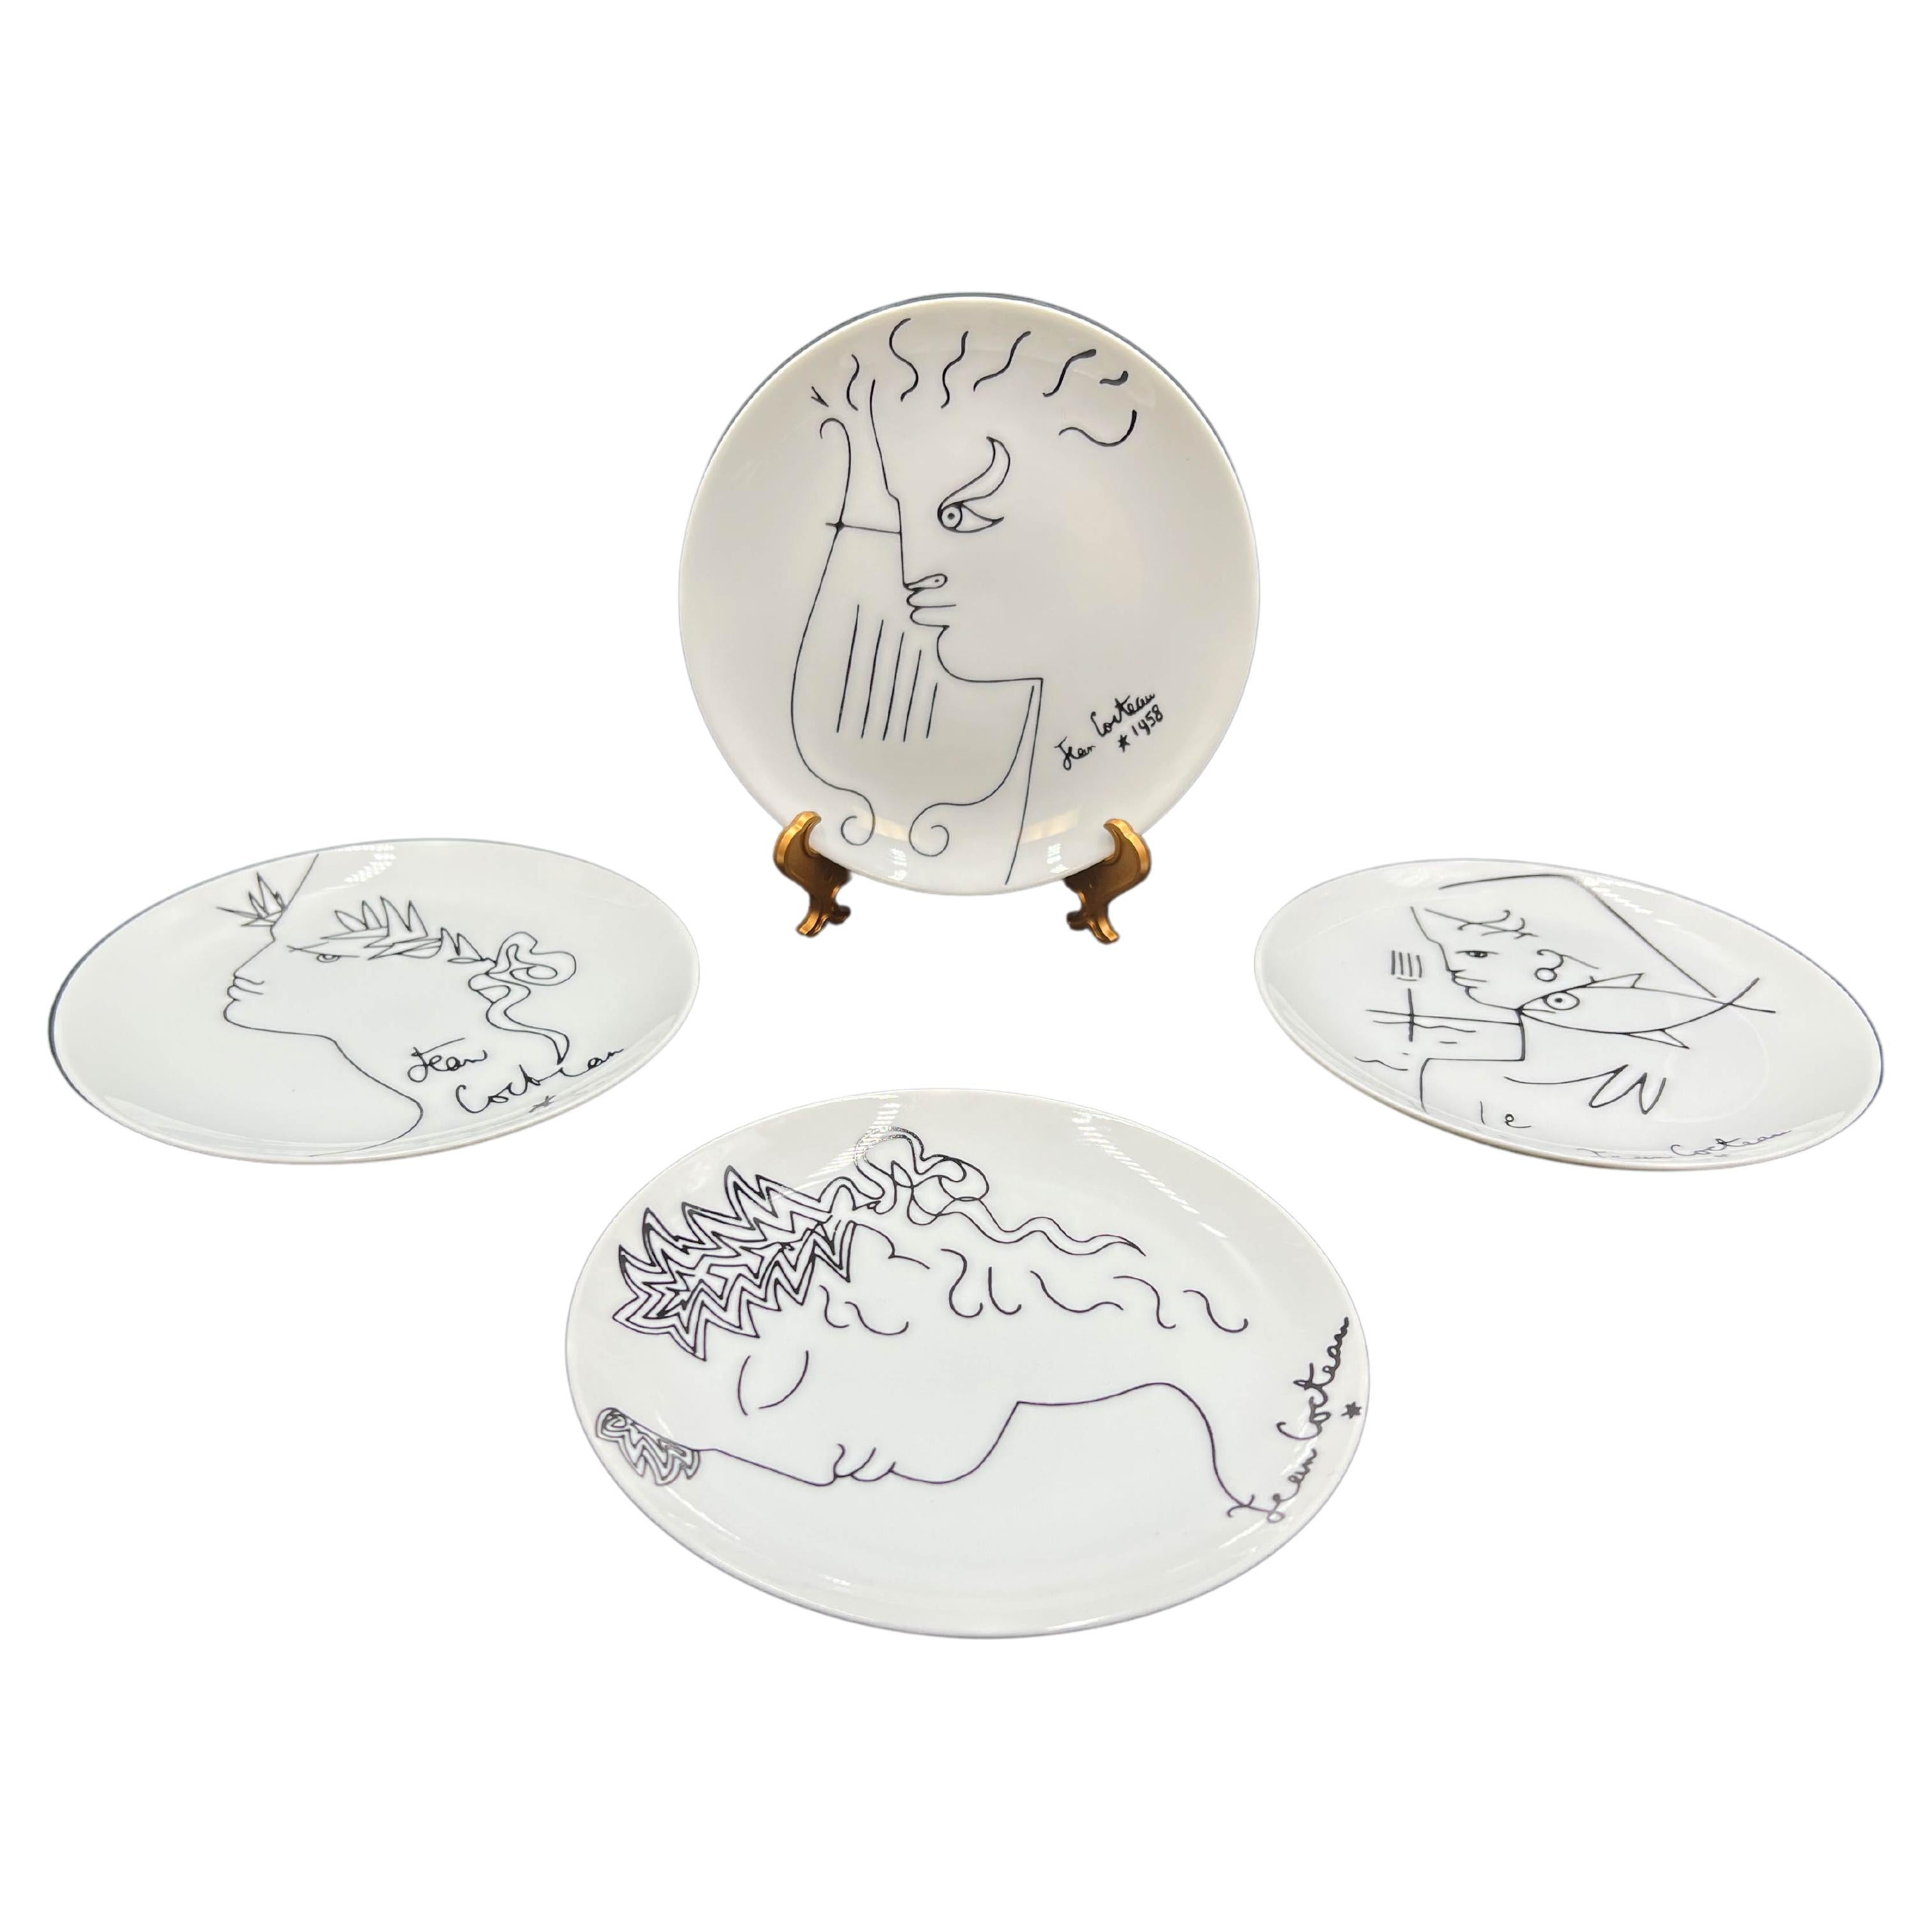 Jean Cocteau Plates by Limoges, 1958 - Set of 4 For Sale